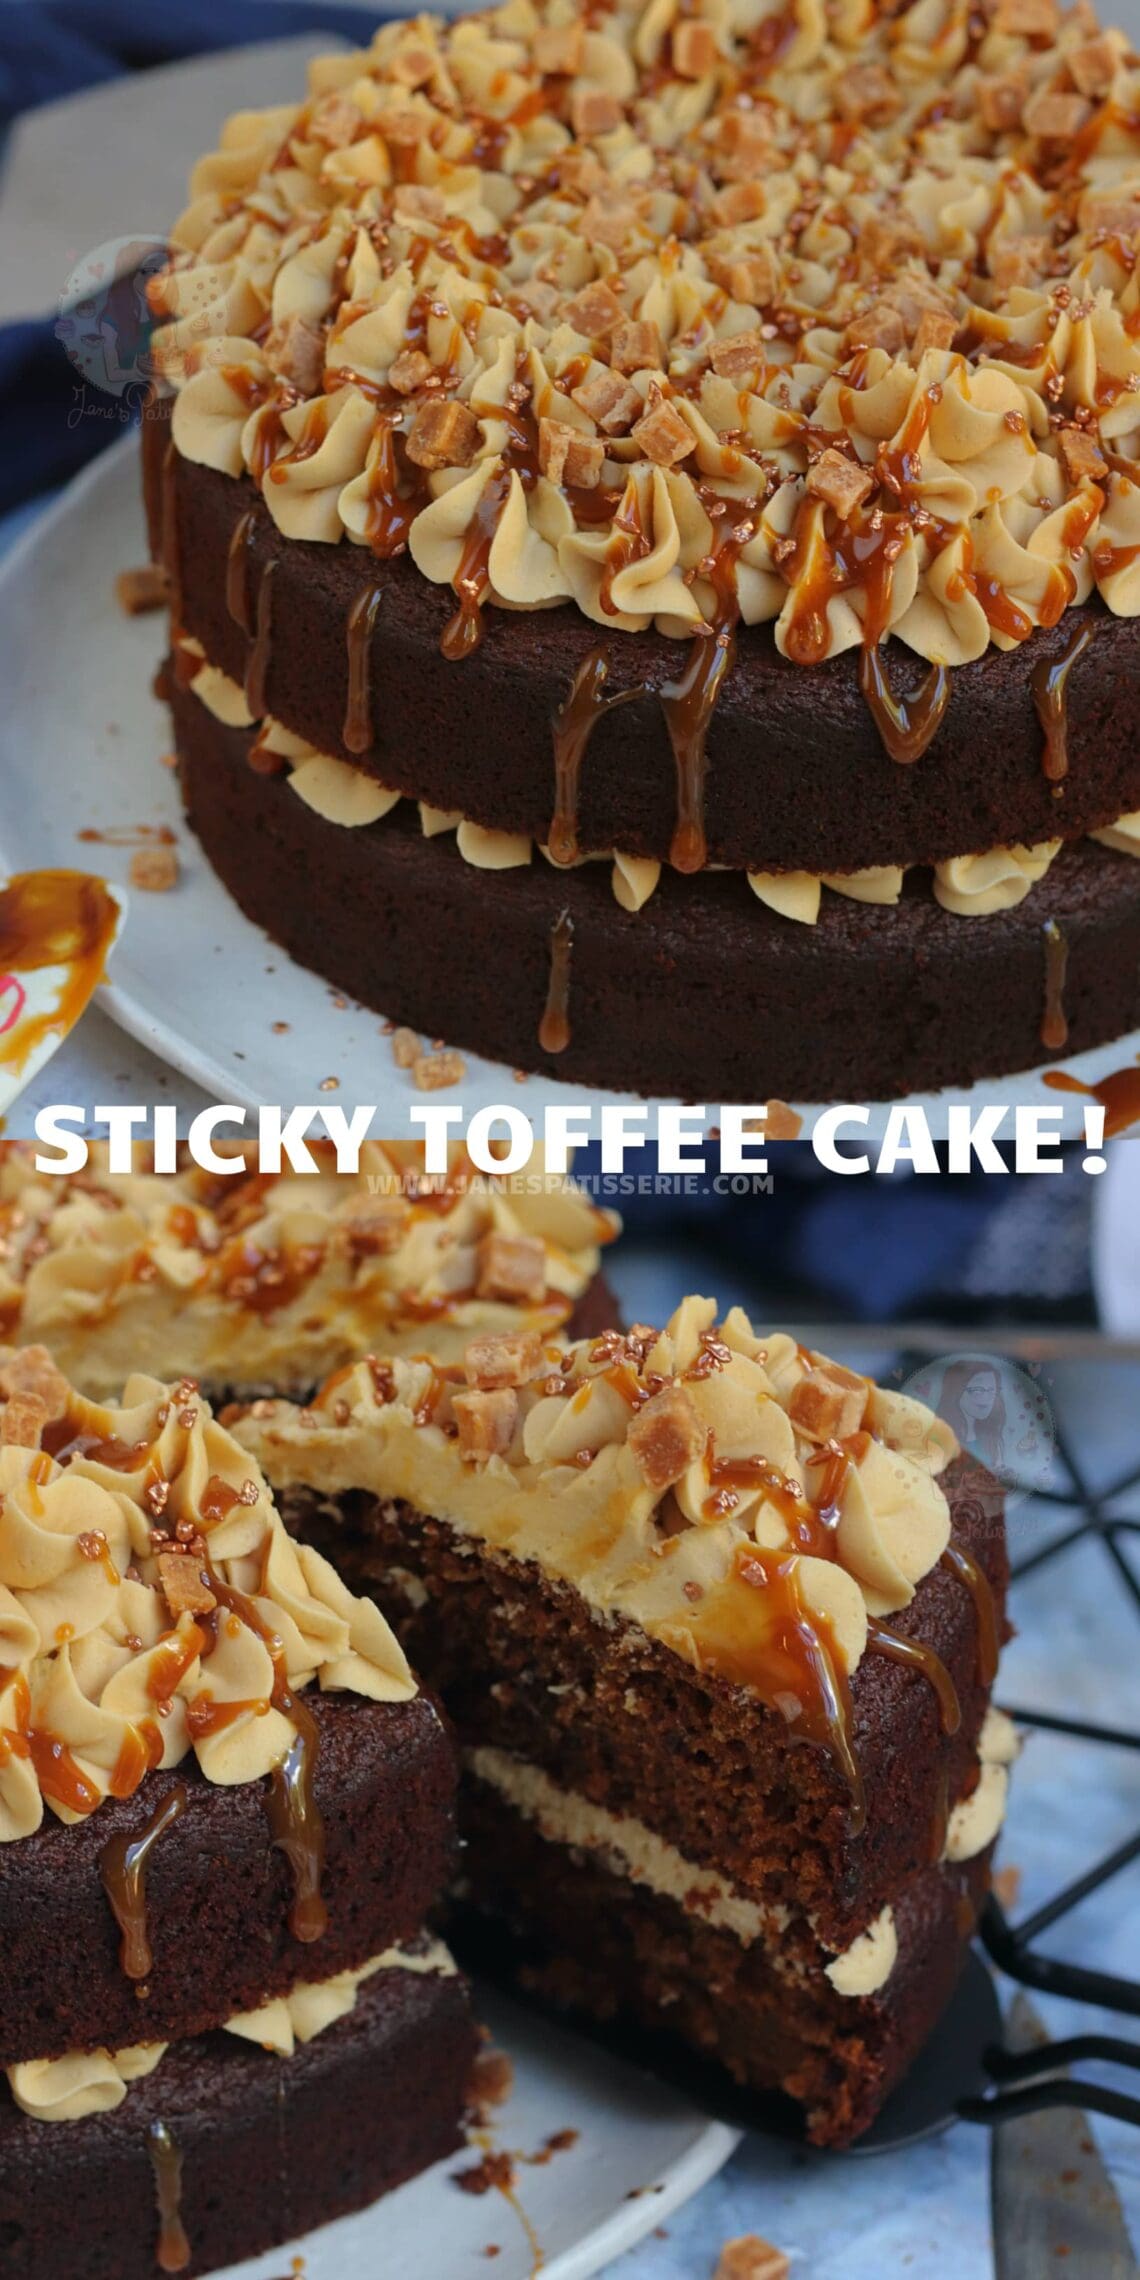 Sticky Toffee Cake! - Jane's Patisserie